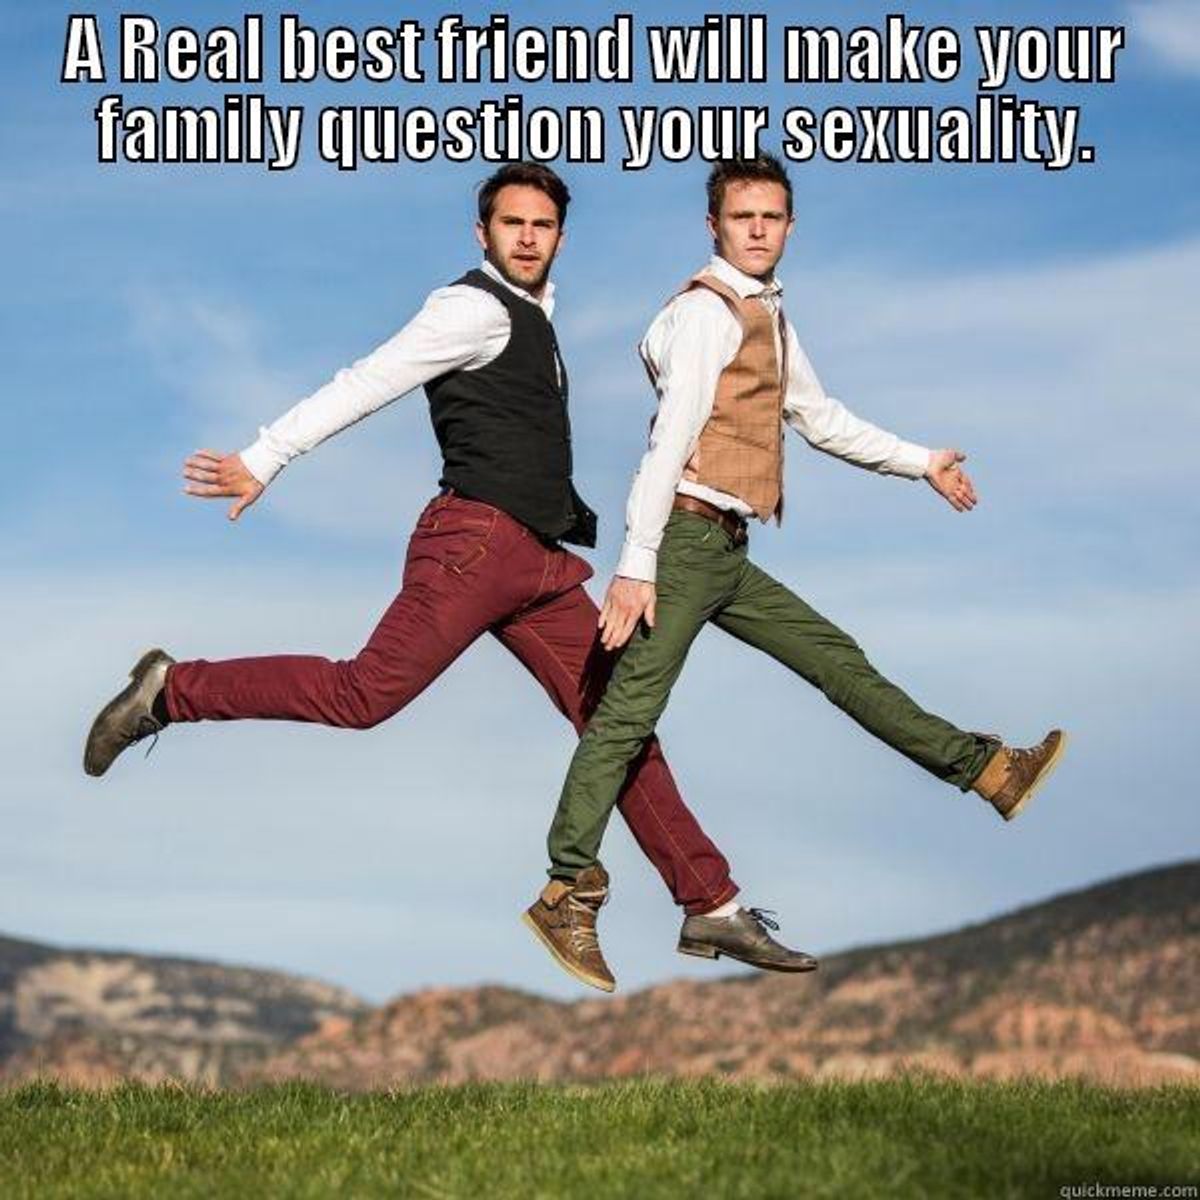 19 Signs You’re In An Unstoppable Bromance!